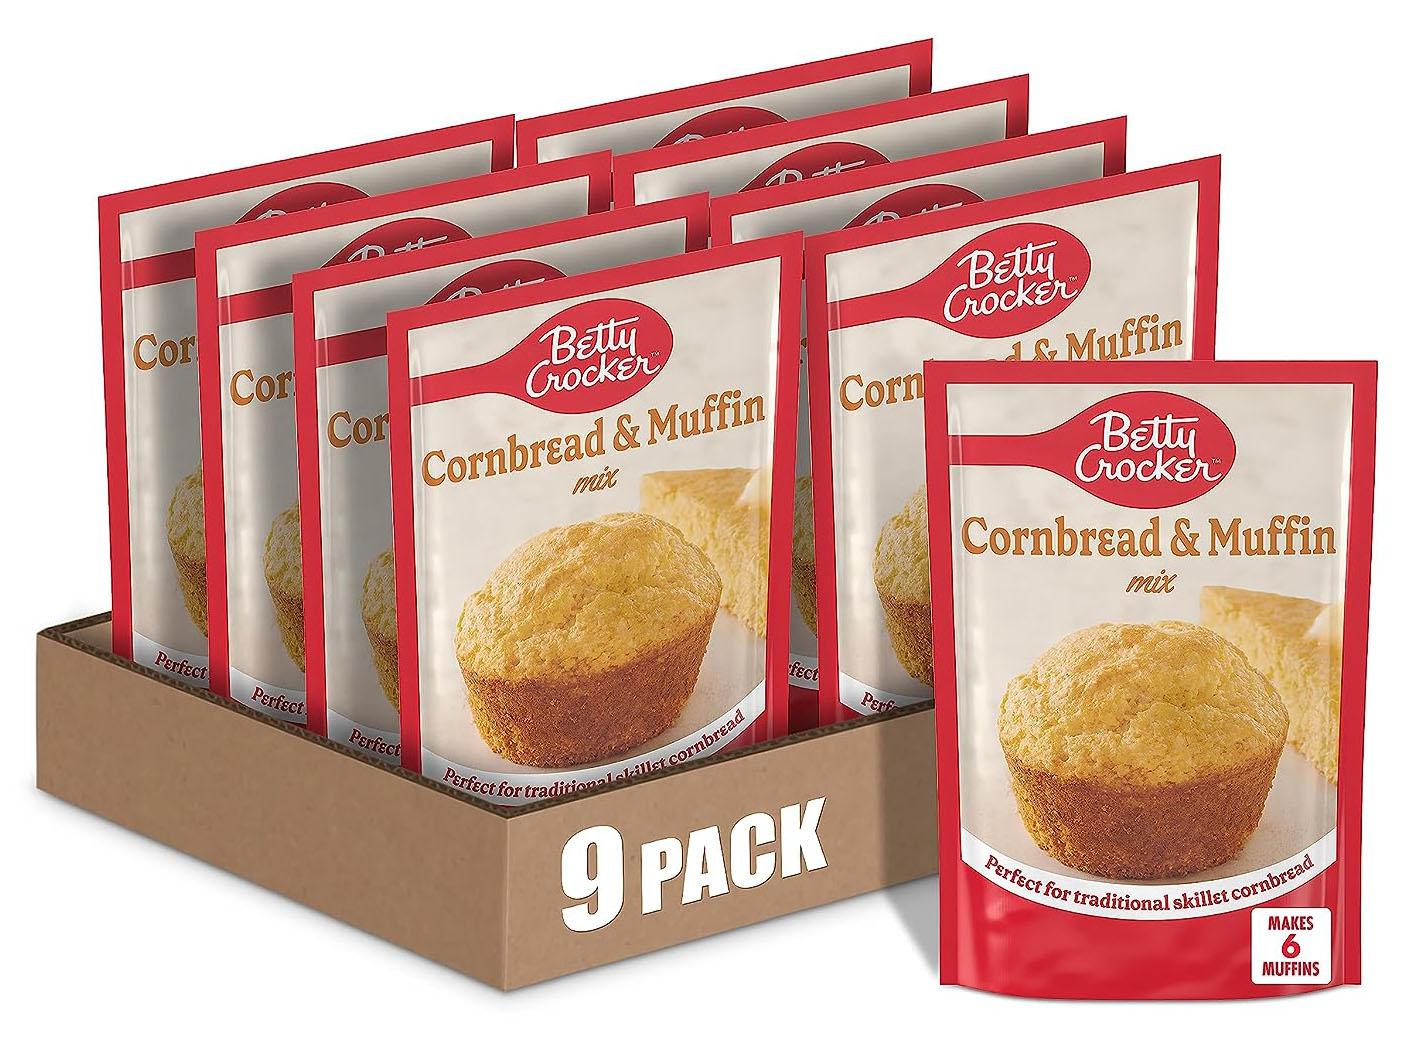 Betty Crocker Cornbread and Muffin Baking Mix 9 Pack for $4.12 Shipped